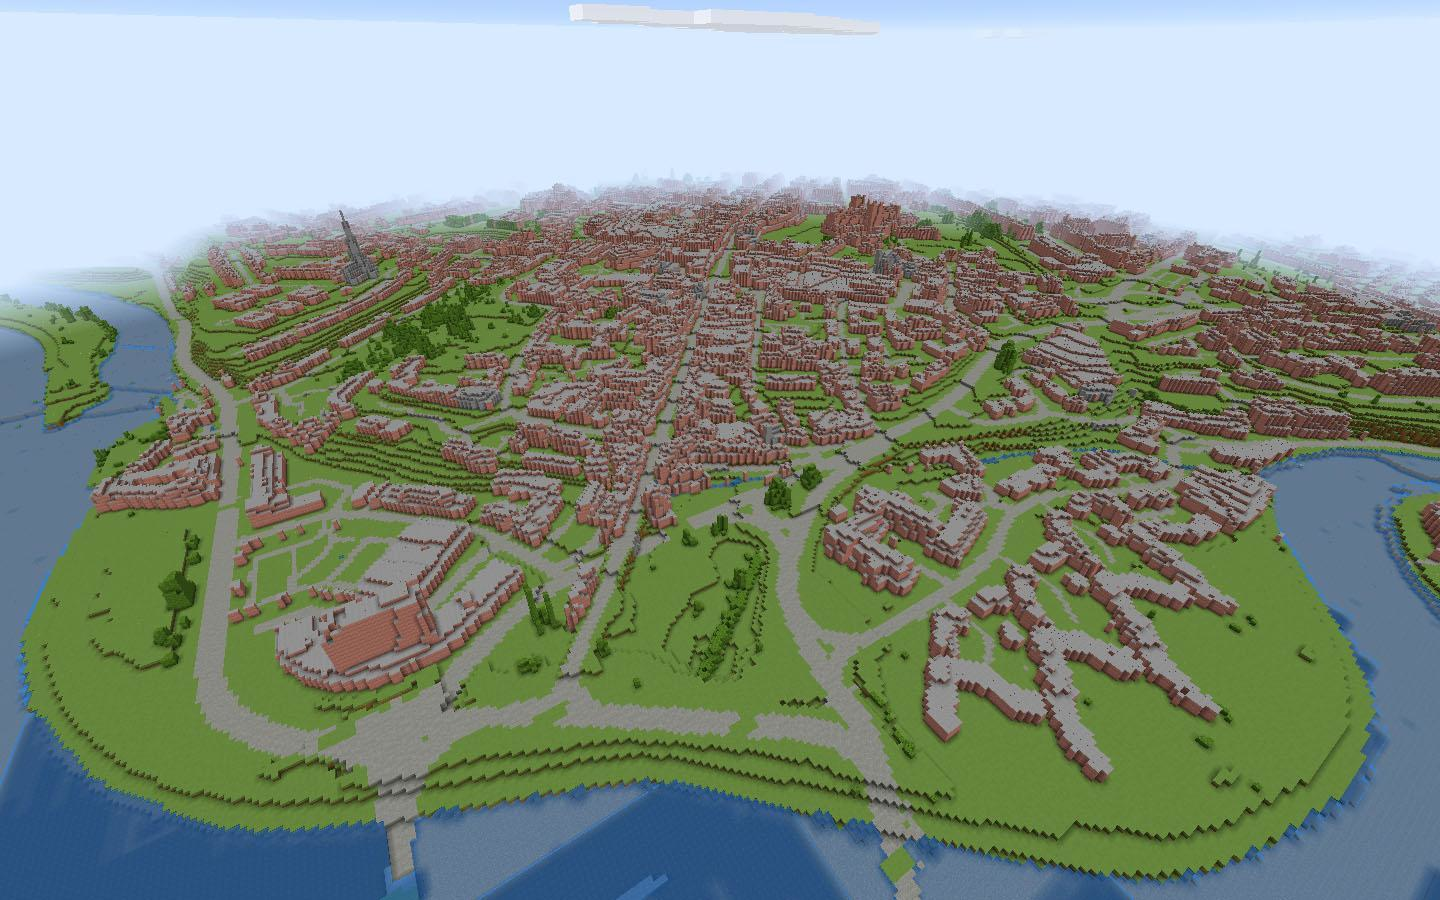 Exeter CityIt features a series of challenge areas to inspire creative thinking about the problems the city faces and offers the Minecraft map for people to test out solutions on.